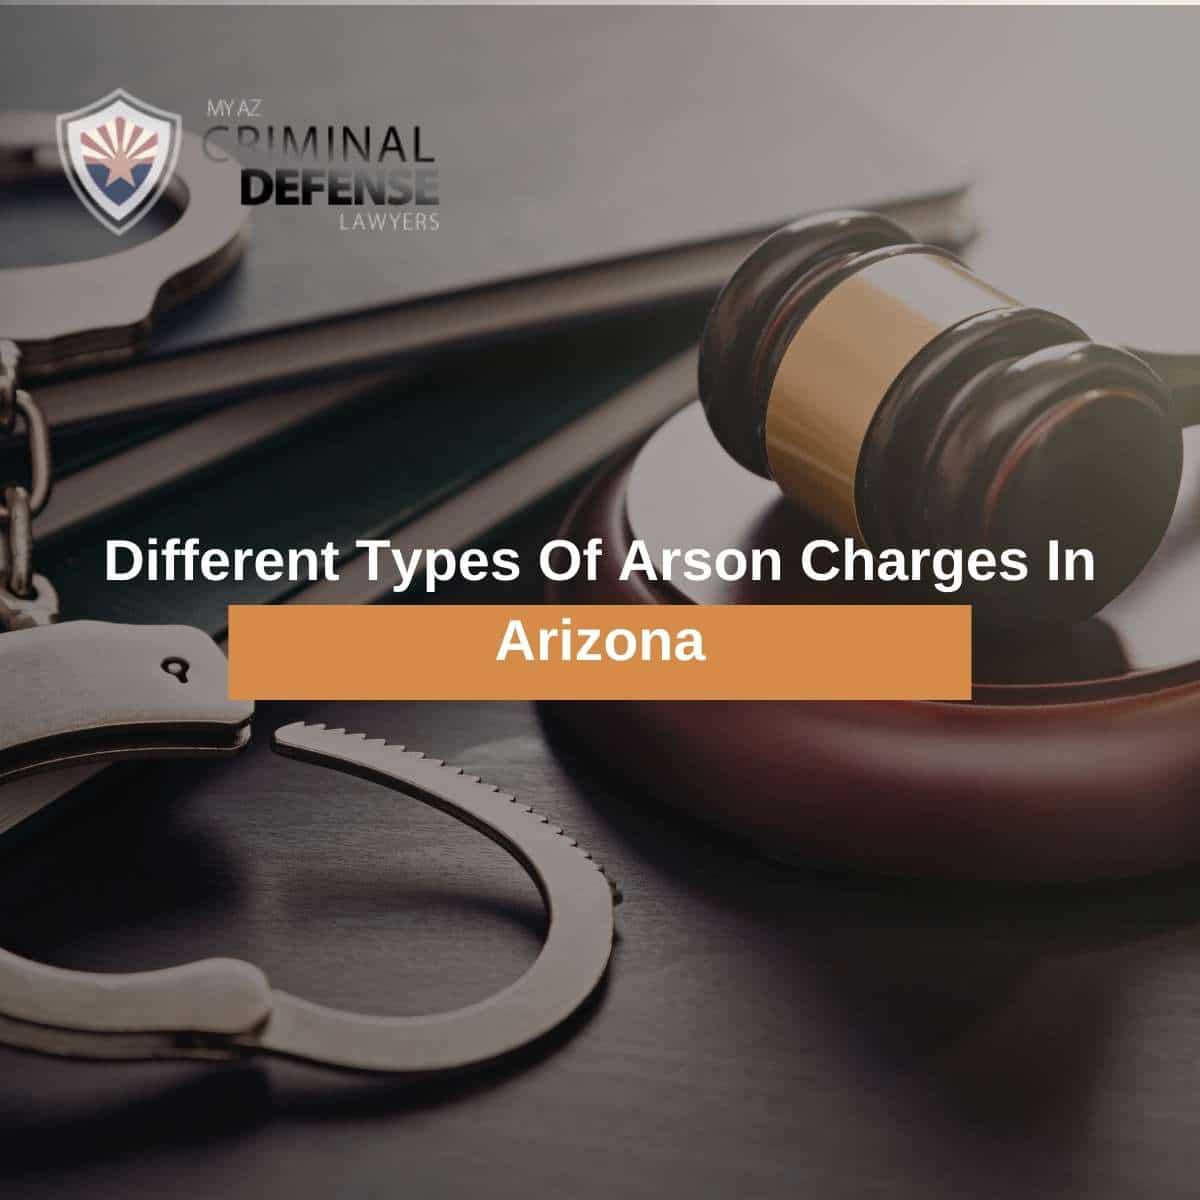 Different Types Of Arson Charges In Arizona